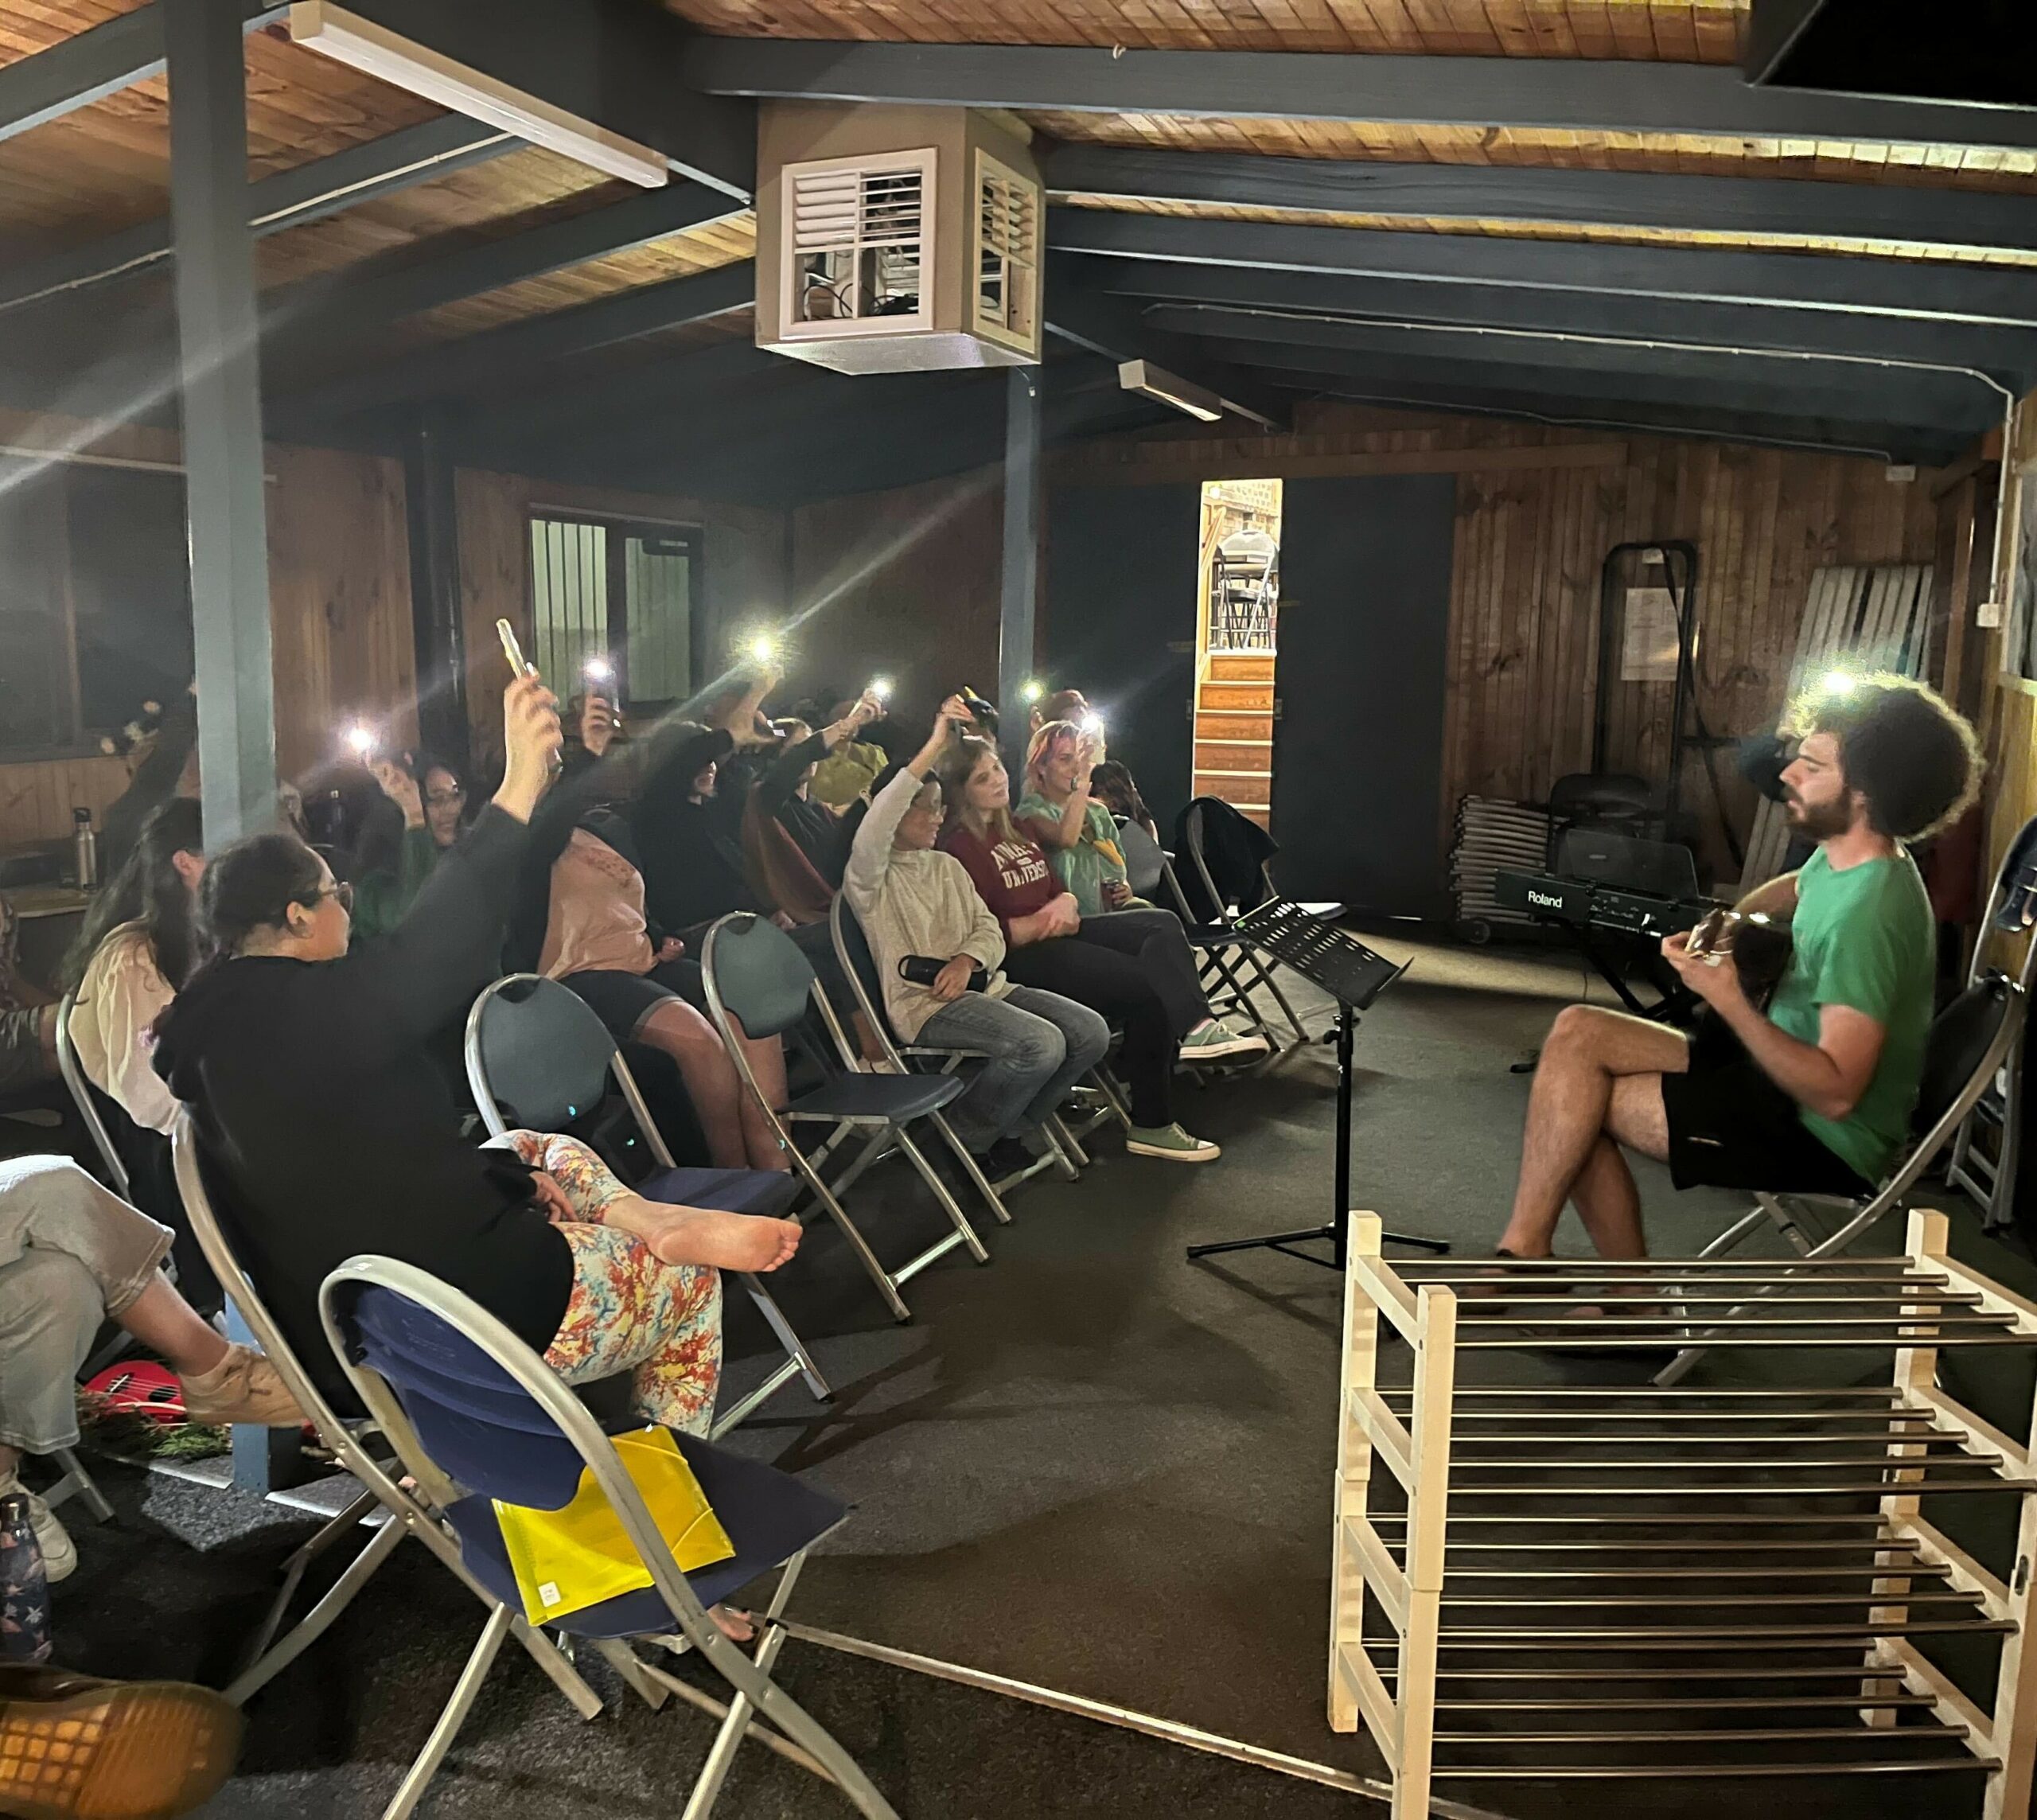 A moment from our Revue - a guitarist plays and sings sitting on a chair in the right of the image, while towards the left rows of people sing along while waving phones with lit torches